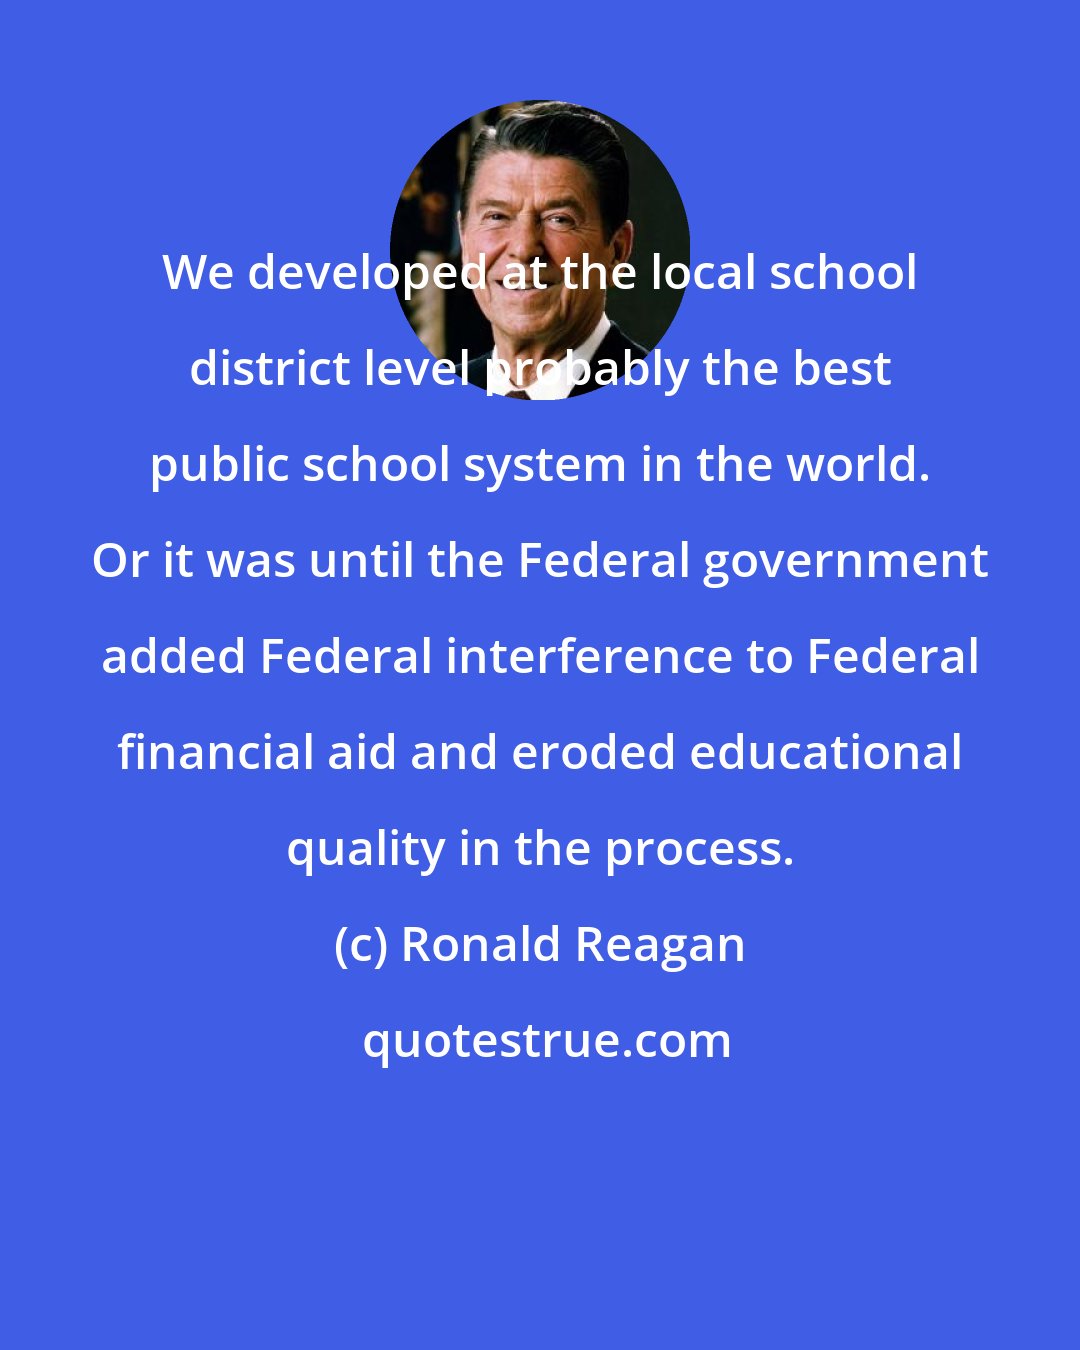 Ronald Reagan: We developed at the local school district level probably the best public school system in the world. Or it was until the Federal government added Federal interference to Federal financial aid and eroded educational quality in the process.